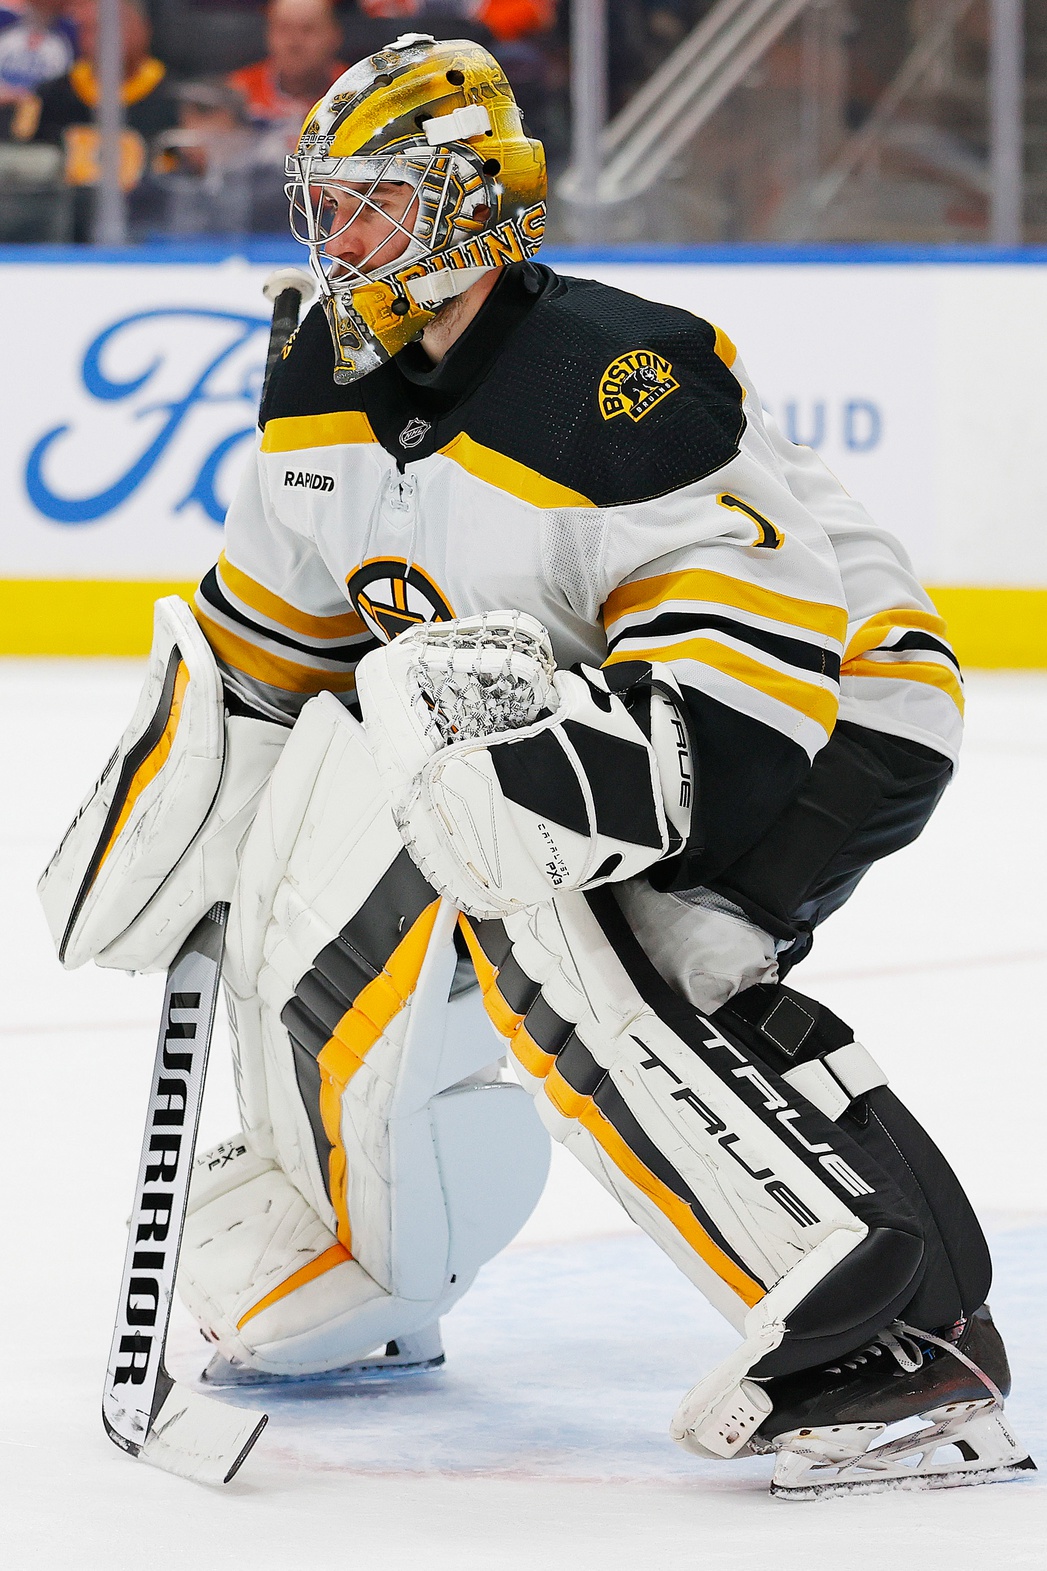 Resetting Bruins' depth chart with Swayman, Frederic signed